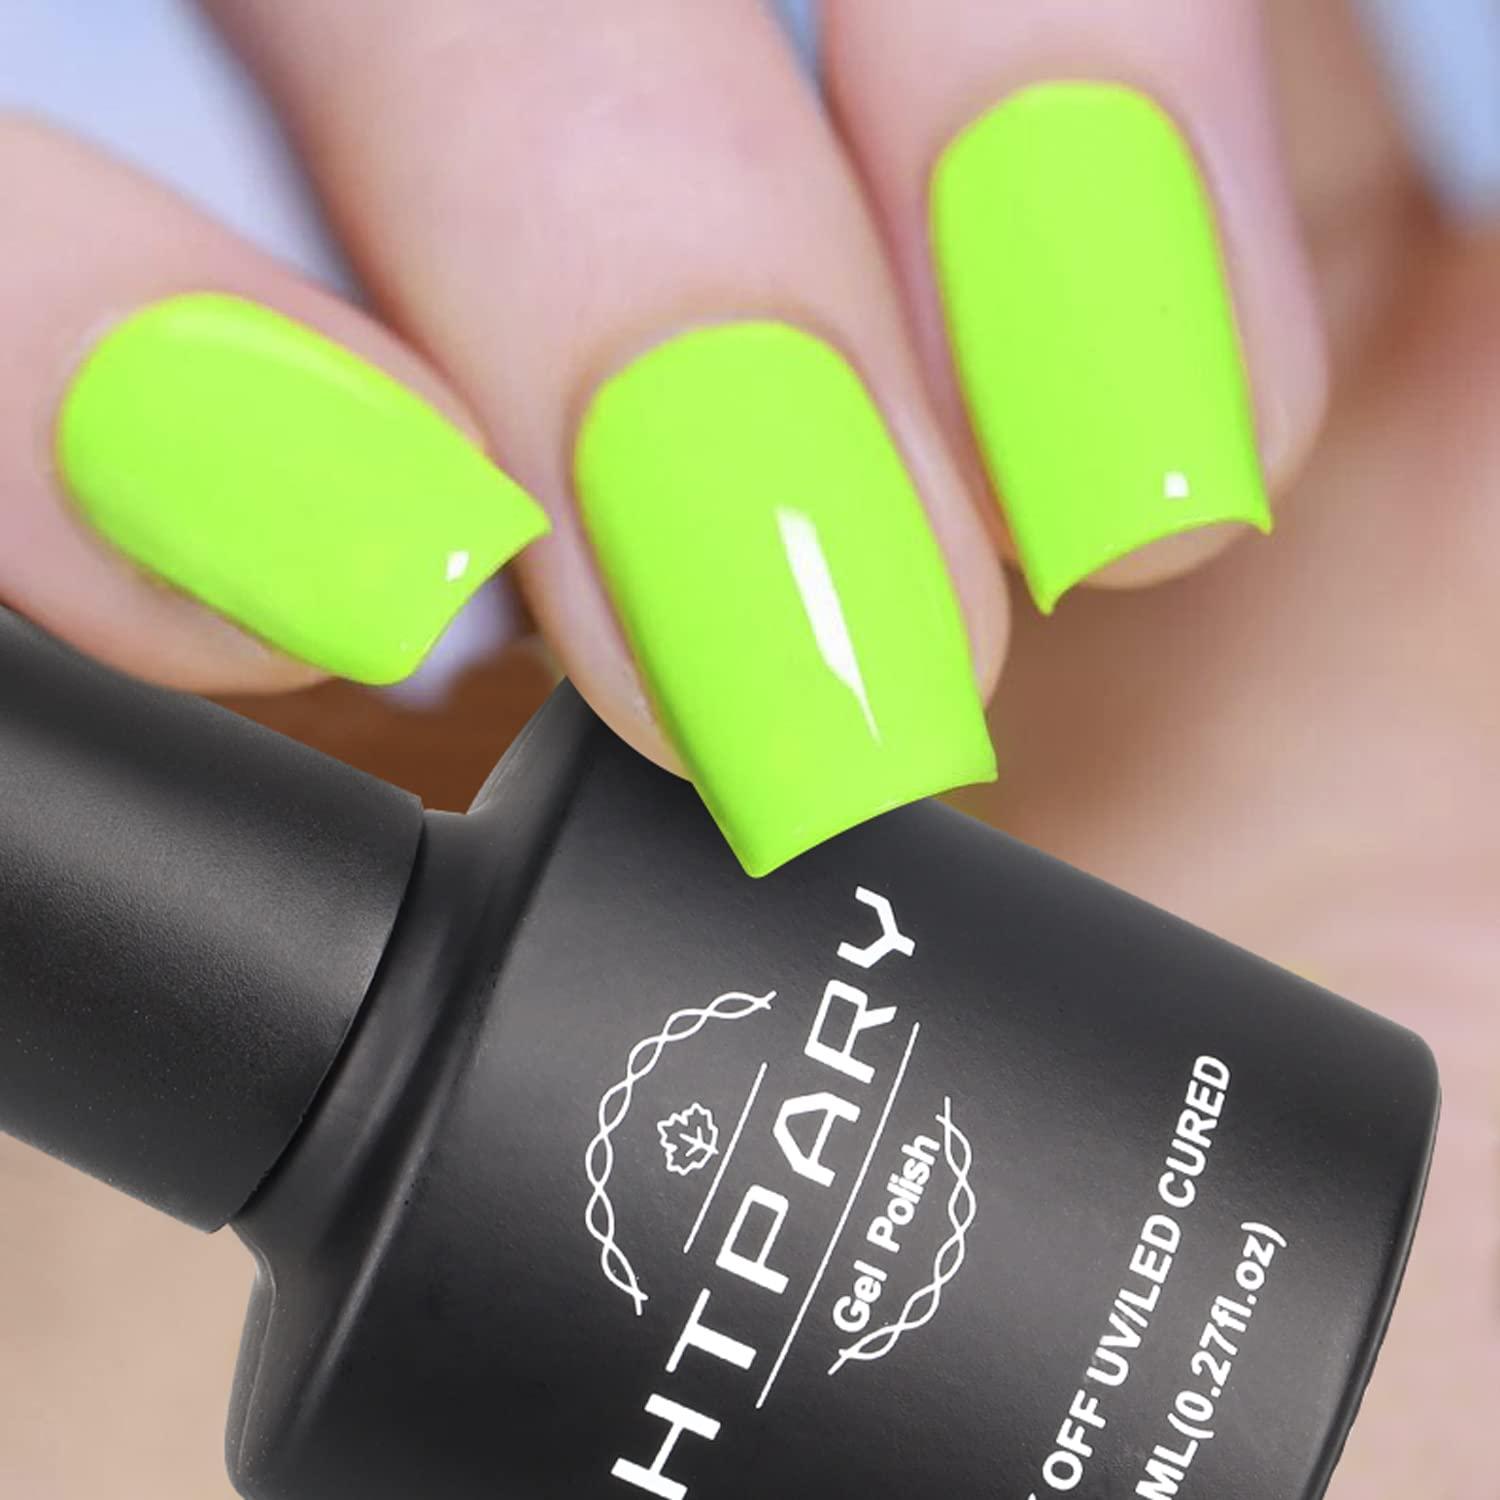 Buy VENALISA Green Neon Gel Nail Polish Summer Bright Neon Color Soak Off Gel  Polish Nail Art Manicure Salon Designs Home DIY Use NH02 Online at Low  Prices in India - Amazon.in